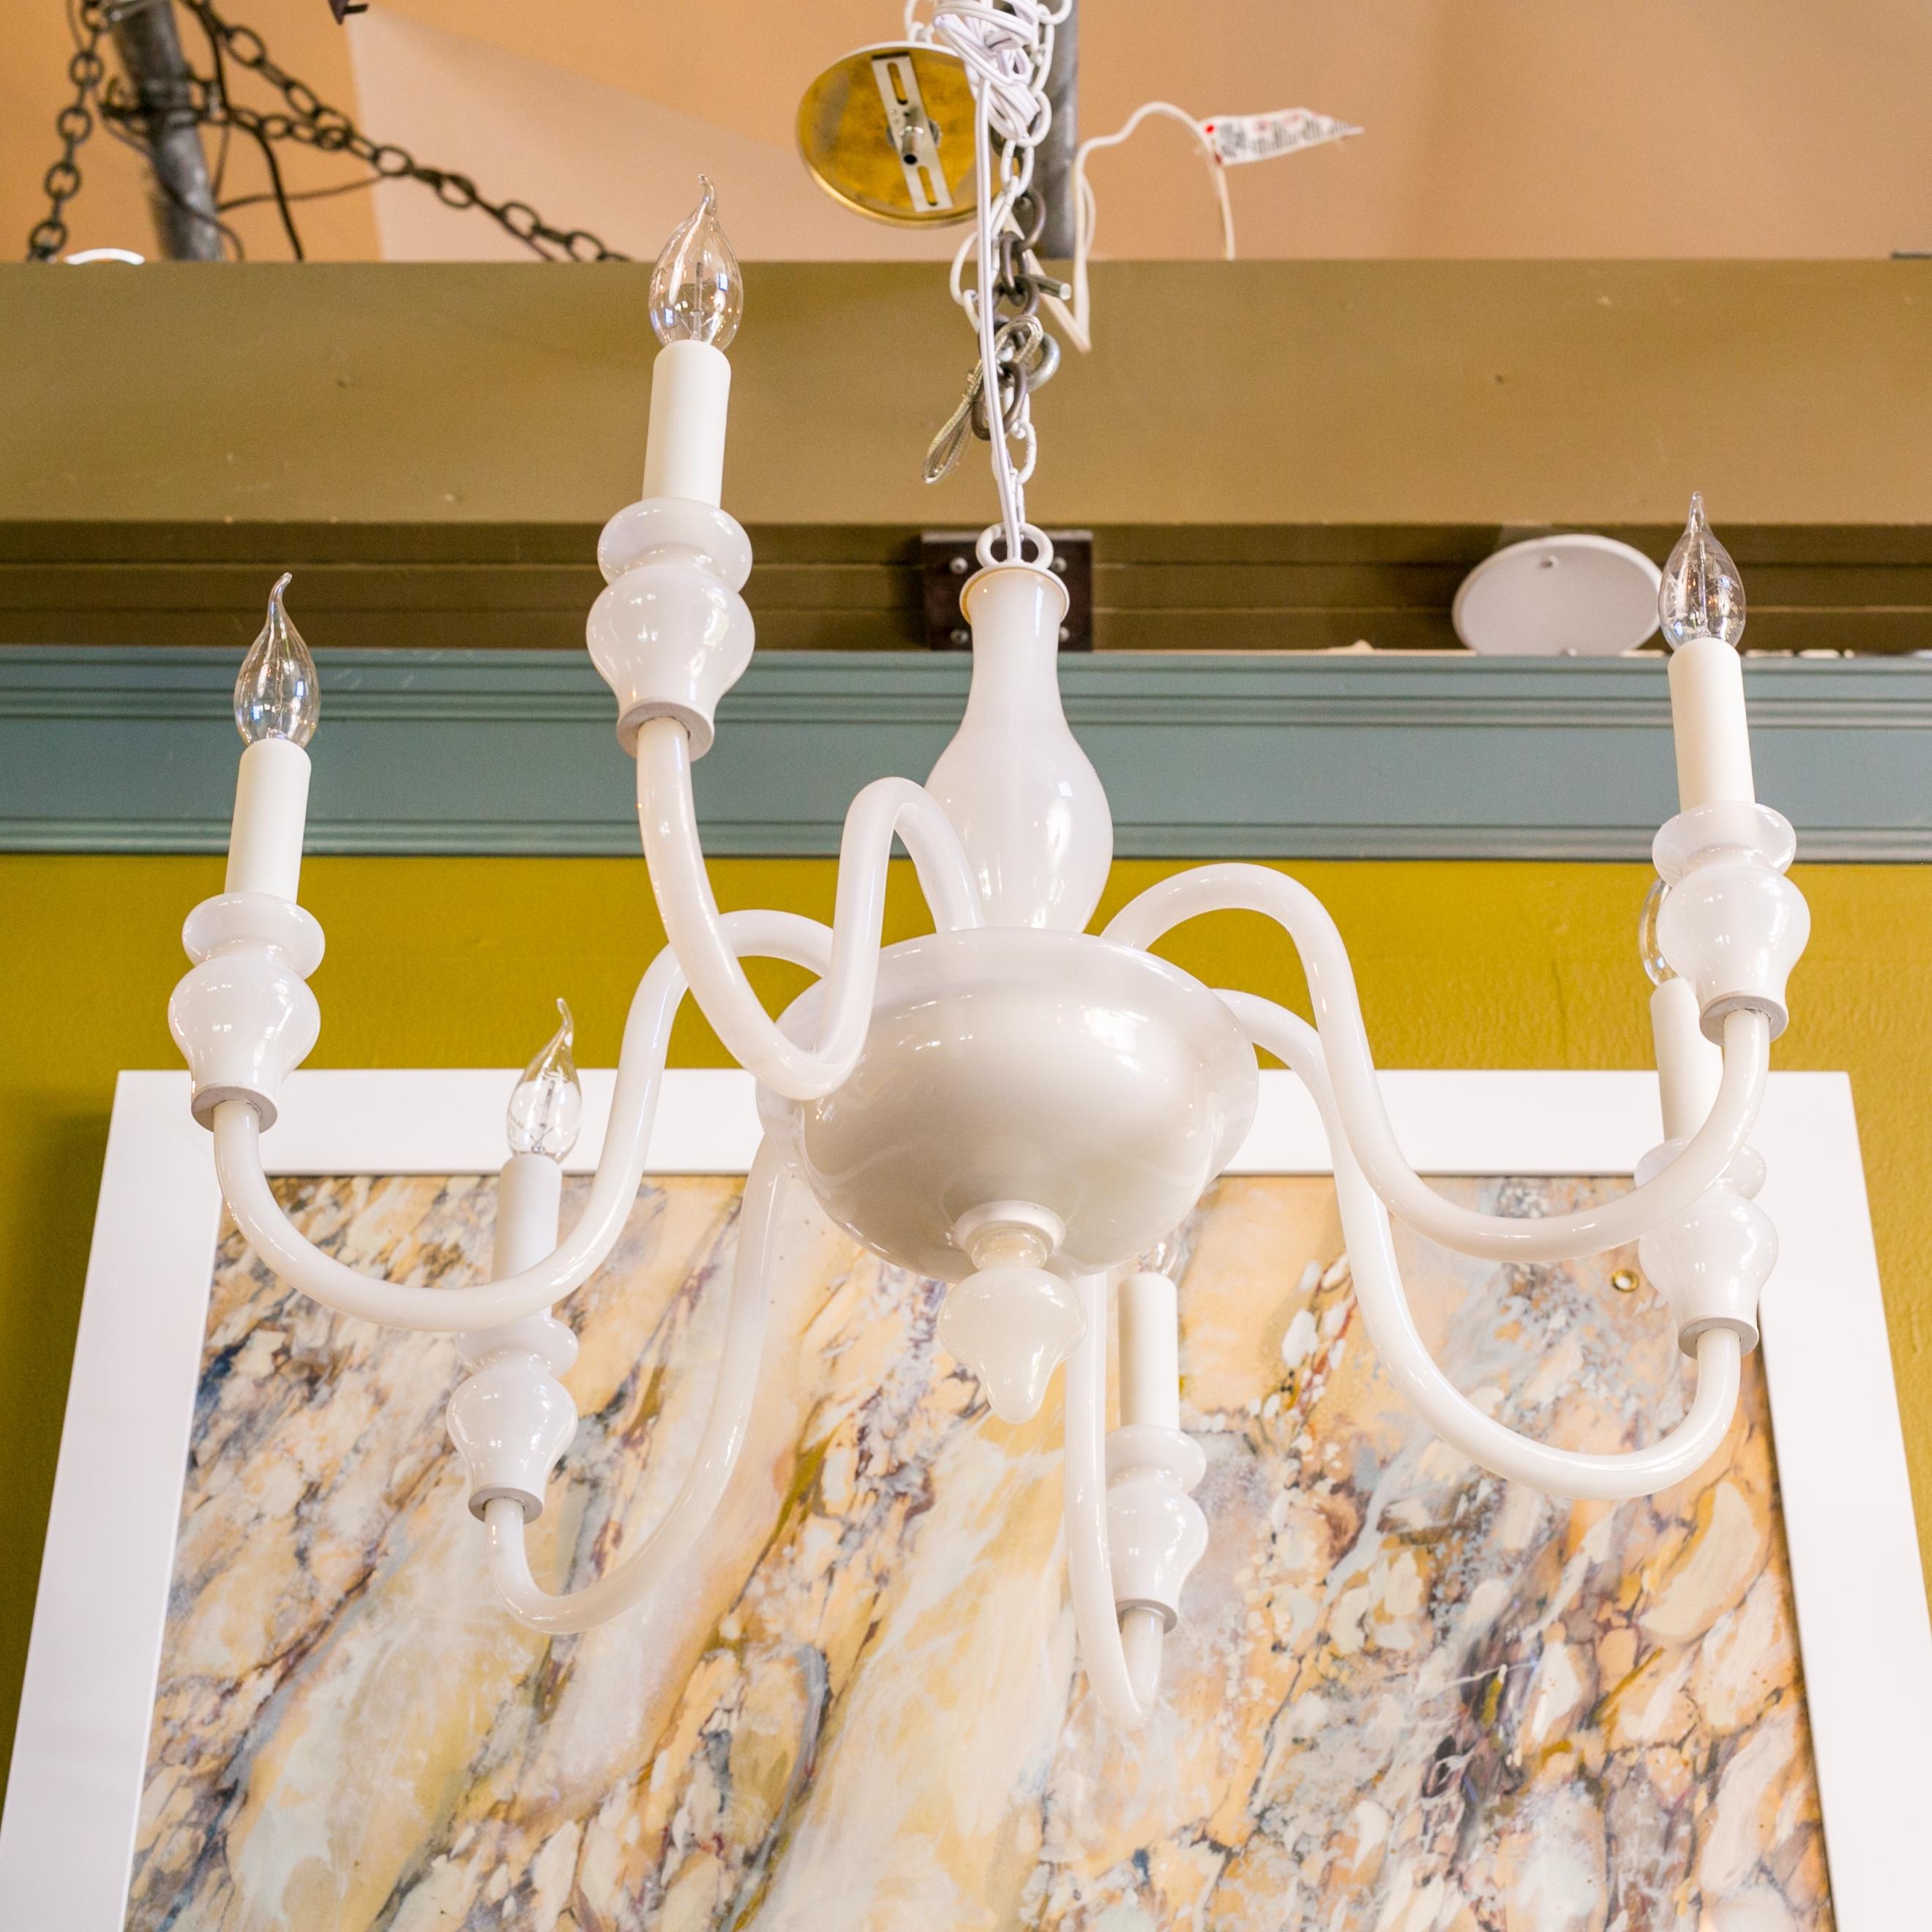 White glass Murano chandelier of interesting white milk glass. This light is interesting since I find so few which are all one color - much less completely simple white. The glass is a tiny bit more translucent than milk glass.

The chandelier has